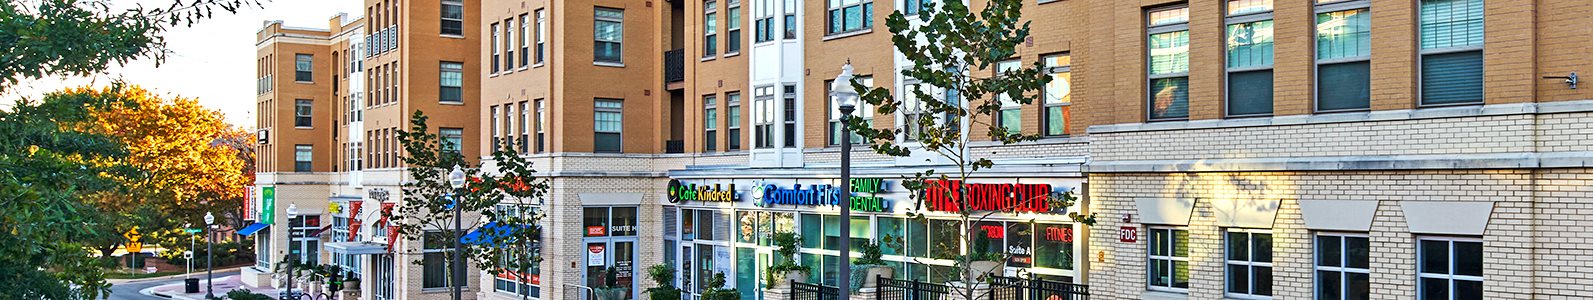 Northgate is centrally located to Arlington, Washington D.C., and features shops and services on the ground floor